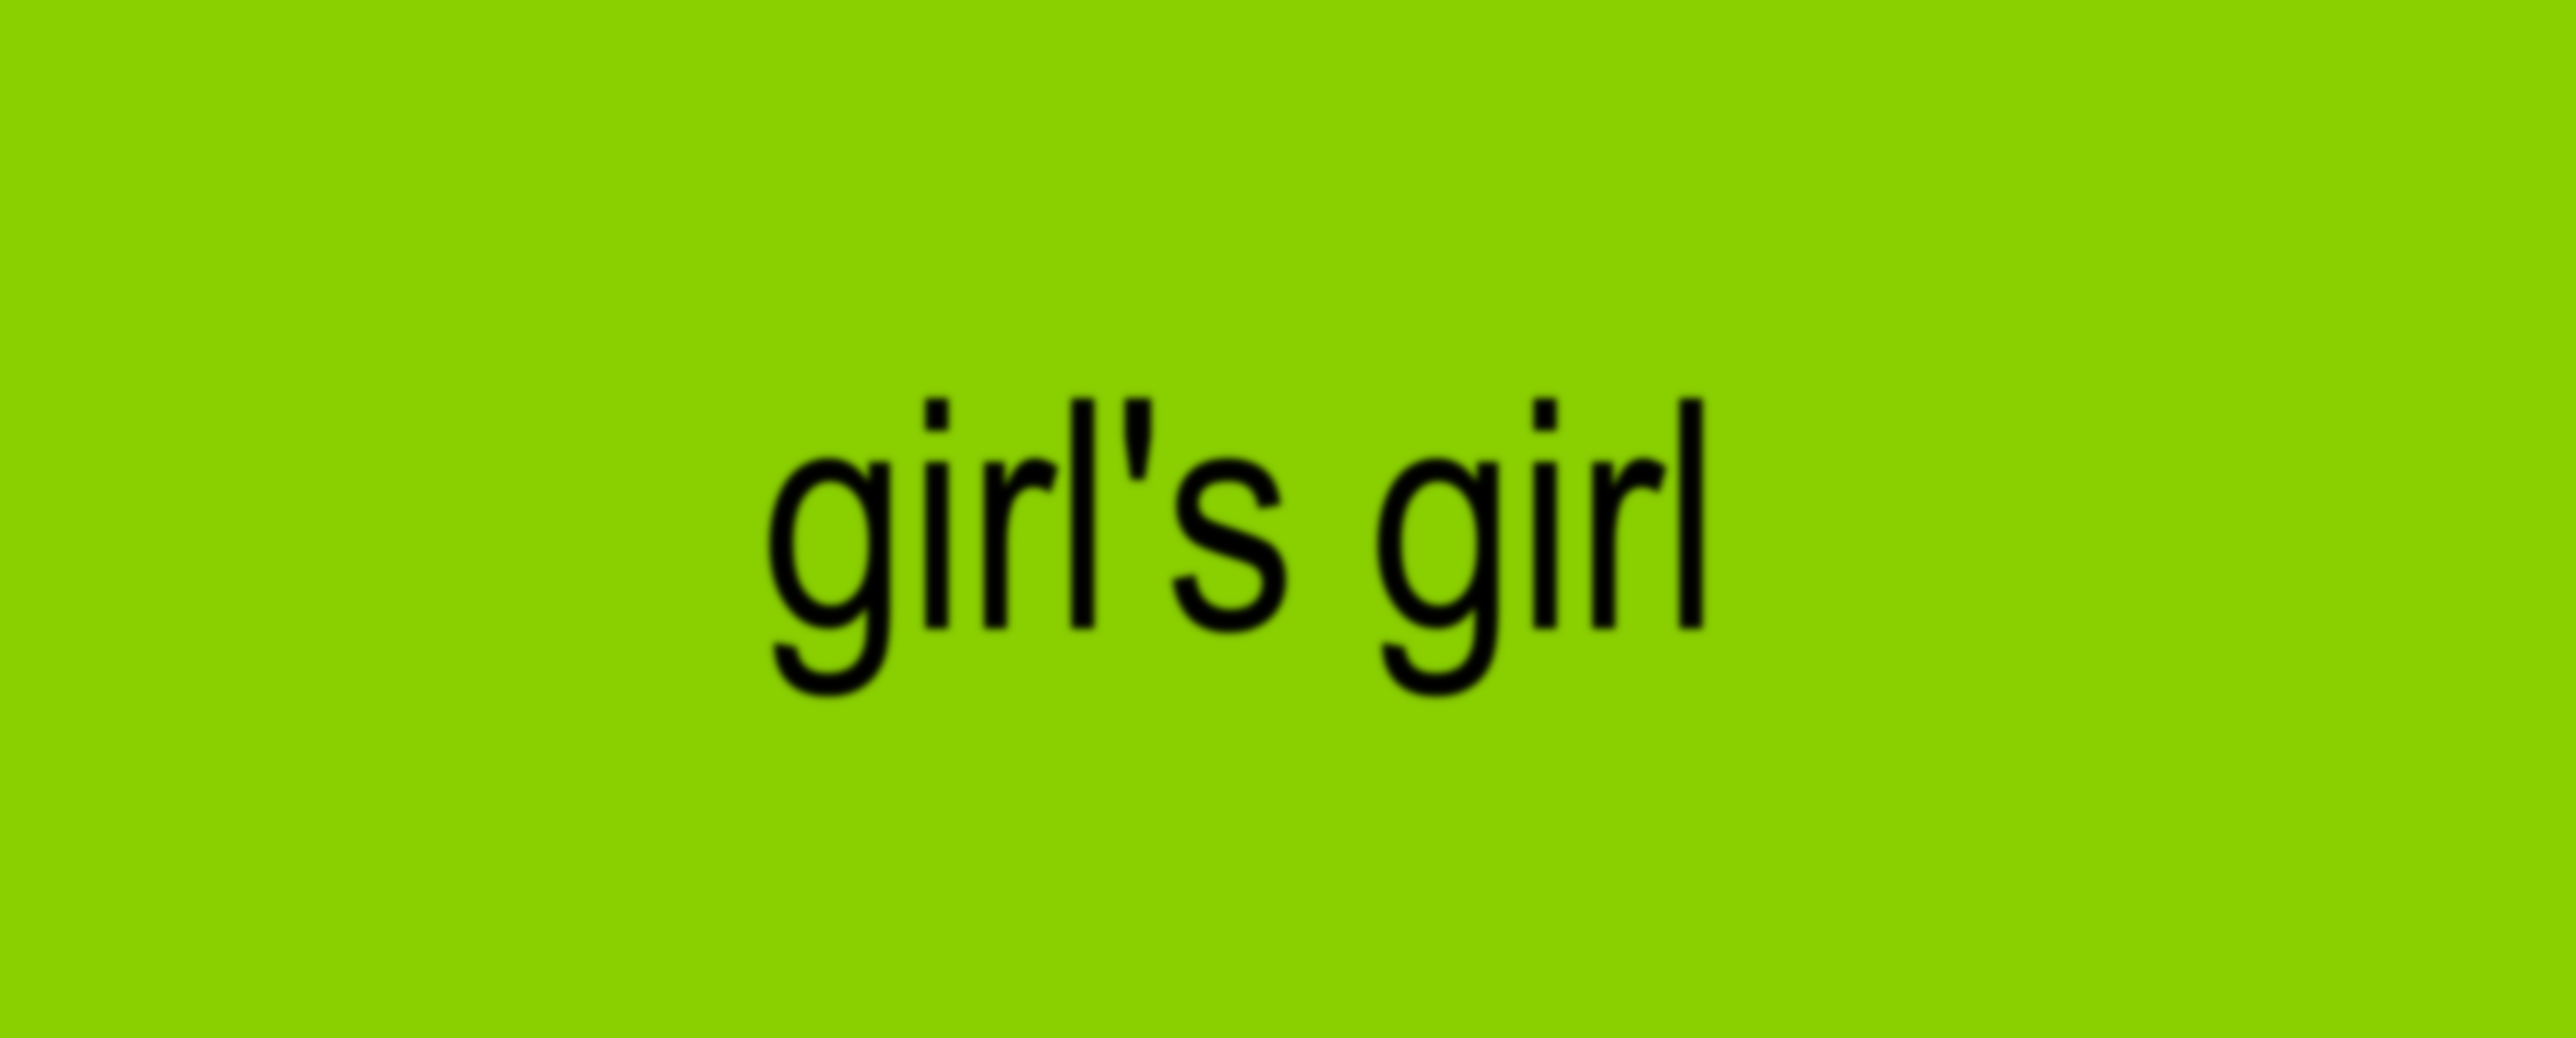 The words "girl's girl" appear in the Charli XCX Brat font, on a Brat-green background.